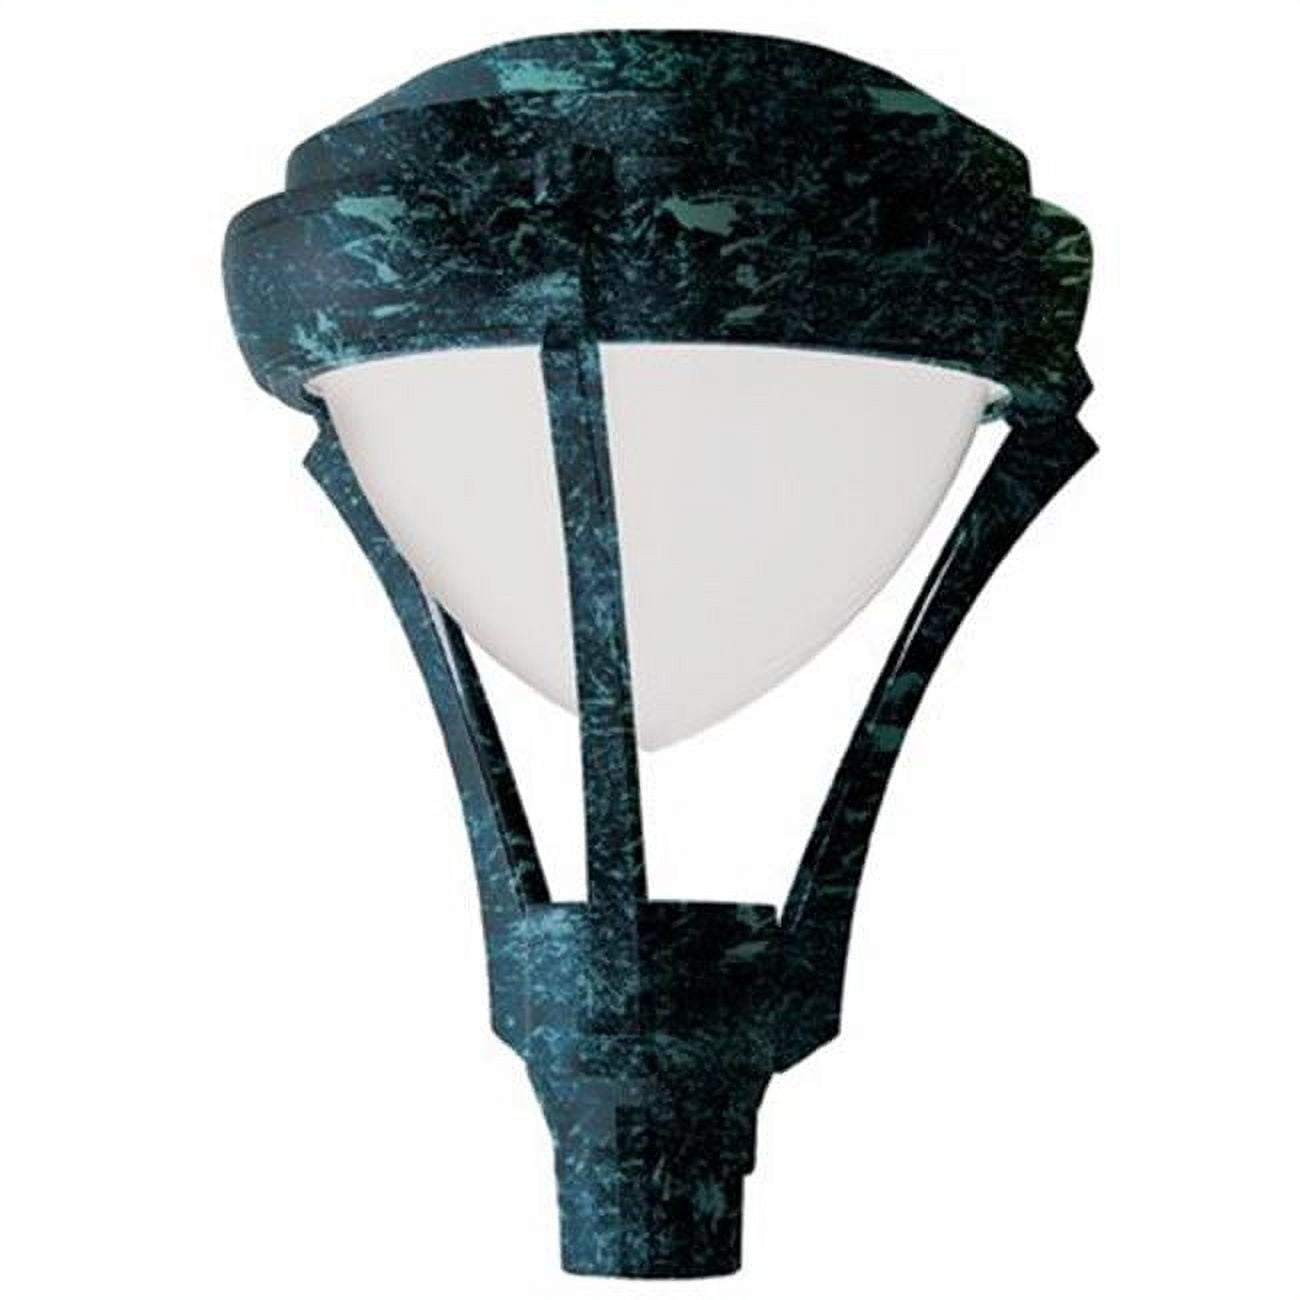 Picture of Dabmar Lighting GM597-VG 70W 120V Powder Coated Cast Aluminum Post Top Light Fixture with Metal Halide Lamp, Verde Green - 27.95 x 21.65 x 21.65 in.